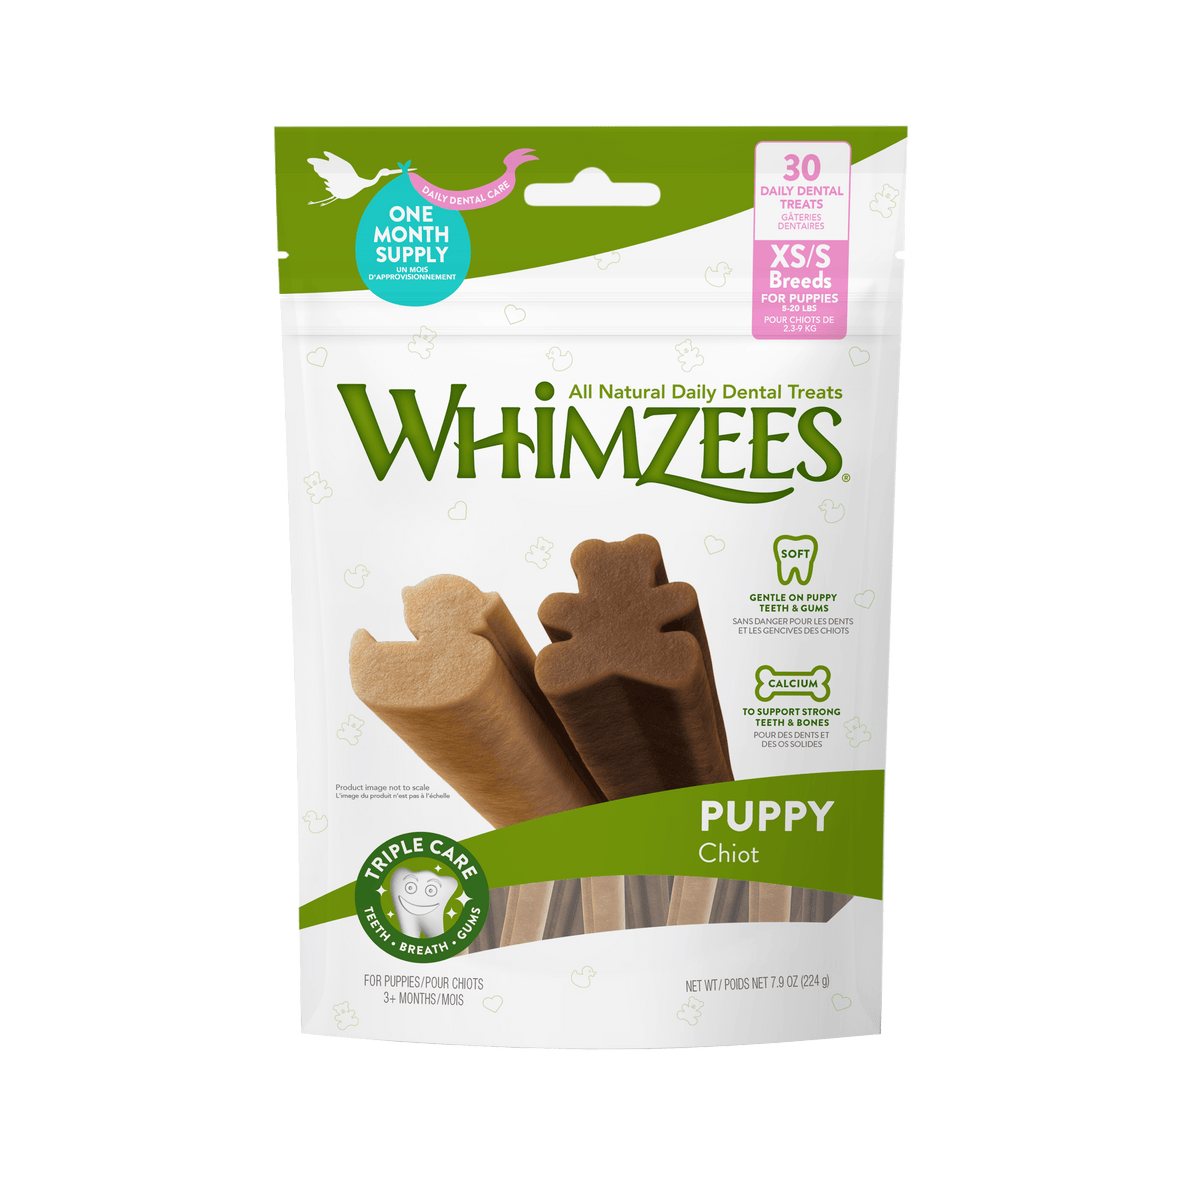 Whimzees Gâteries XS/S Gâteries dentaires pour chiots Whimzees puppy